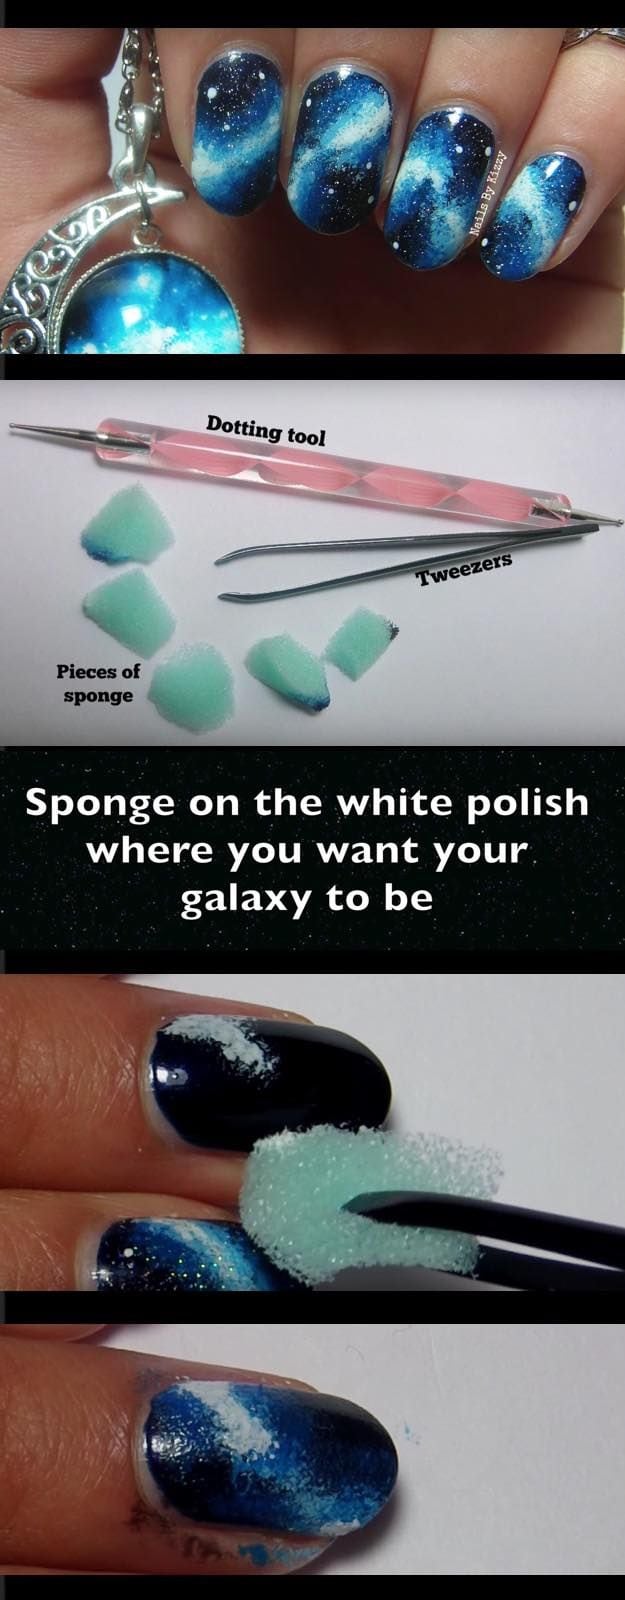 [ad_1]

Super Easy Nail Art Ideas for Beginners – Galaxy Nails Tutorial Nails By Kizzy – Simple Step By Step DIY Tutorials And Pictures For Nailart. Ideas For Every Style, All Hair Colors, Sparkle, Valentines, And other Awesome Products To Make…